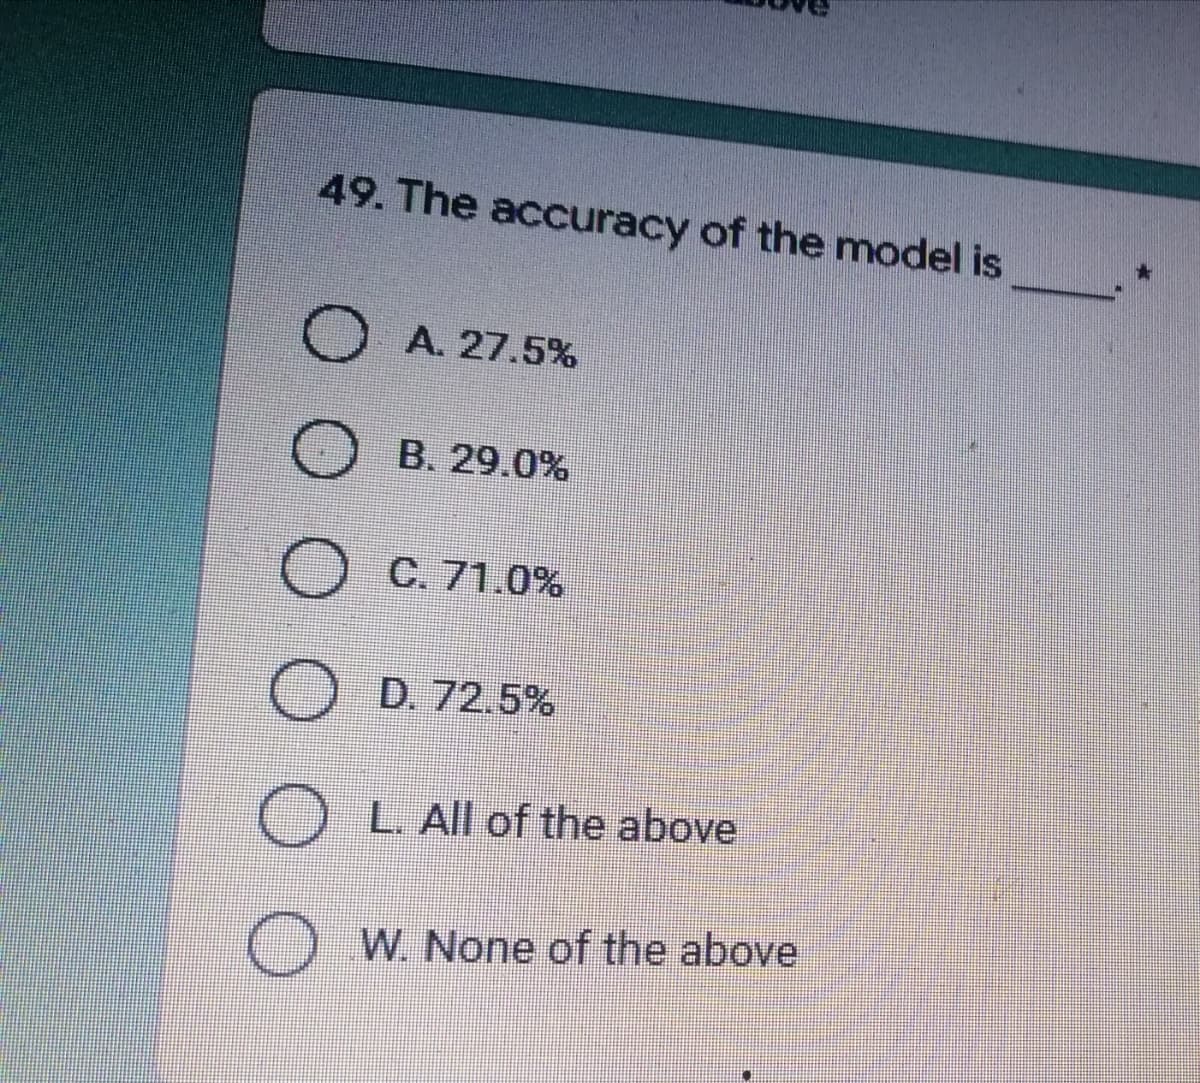 49. The accuracy of the model is
O A. 27.5%
B. 29.0%
O
C. 71.0%
O D. 72.5%
OL. All of the above
OW. None of the above